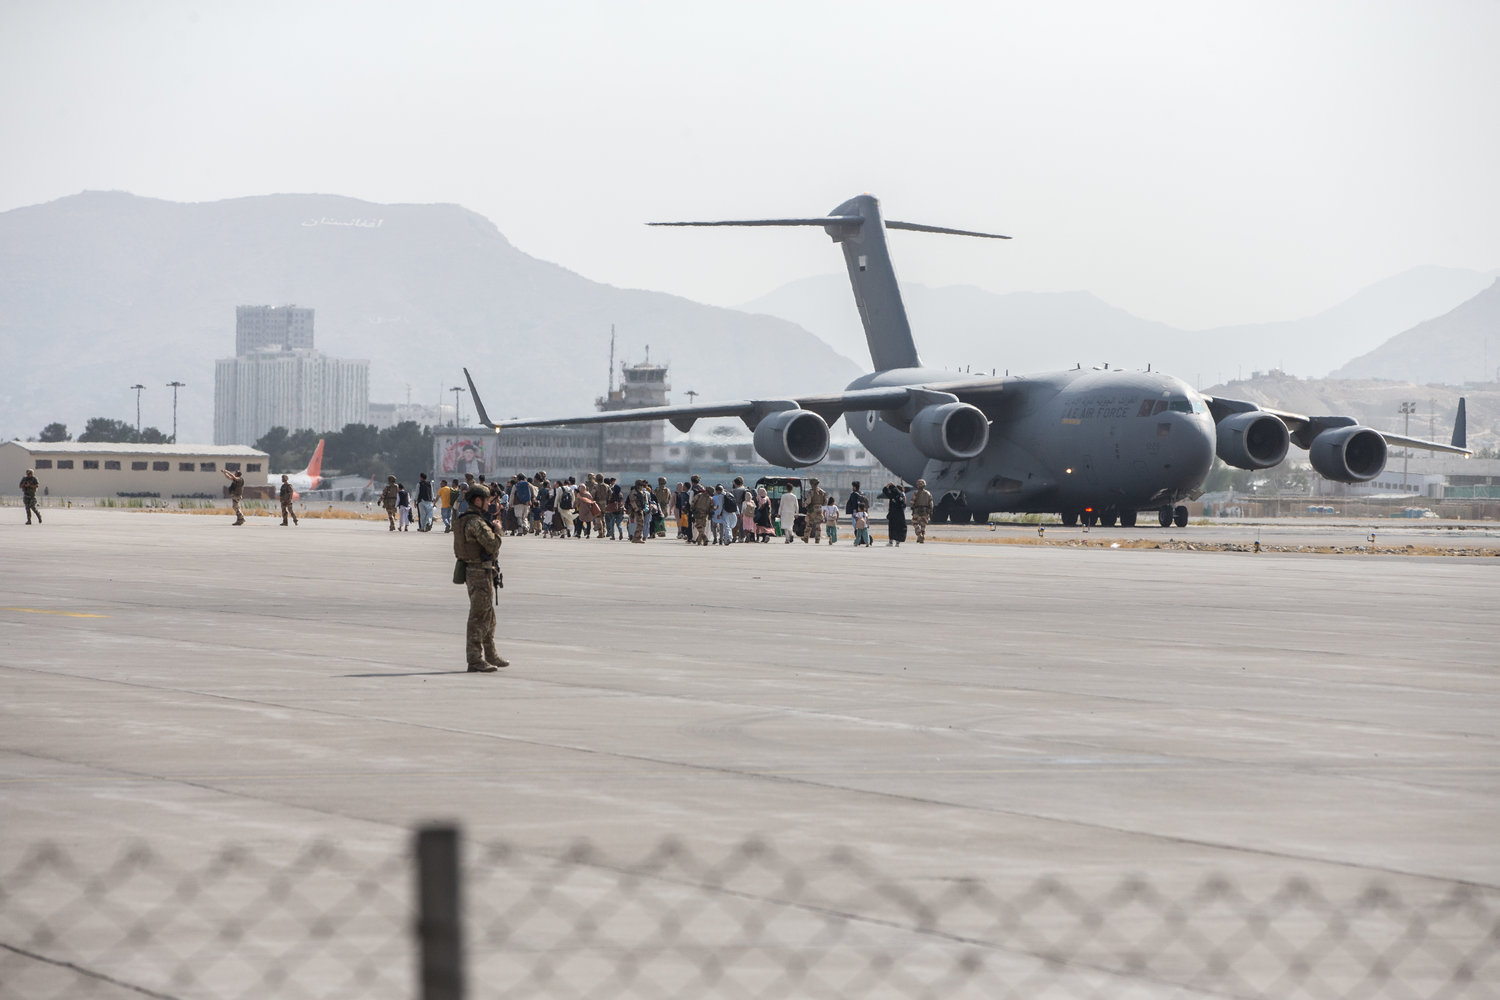 The civilian evacuation at Hamid Karzai International Airport in Kabul on Aug. 21, five days before the attack that killed as many as 170 Afghan civilians and 13 U.S. service personnel.